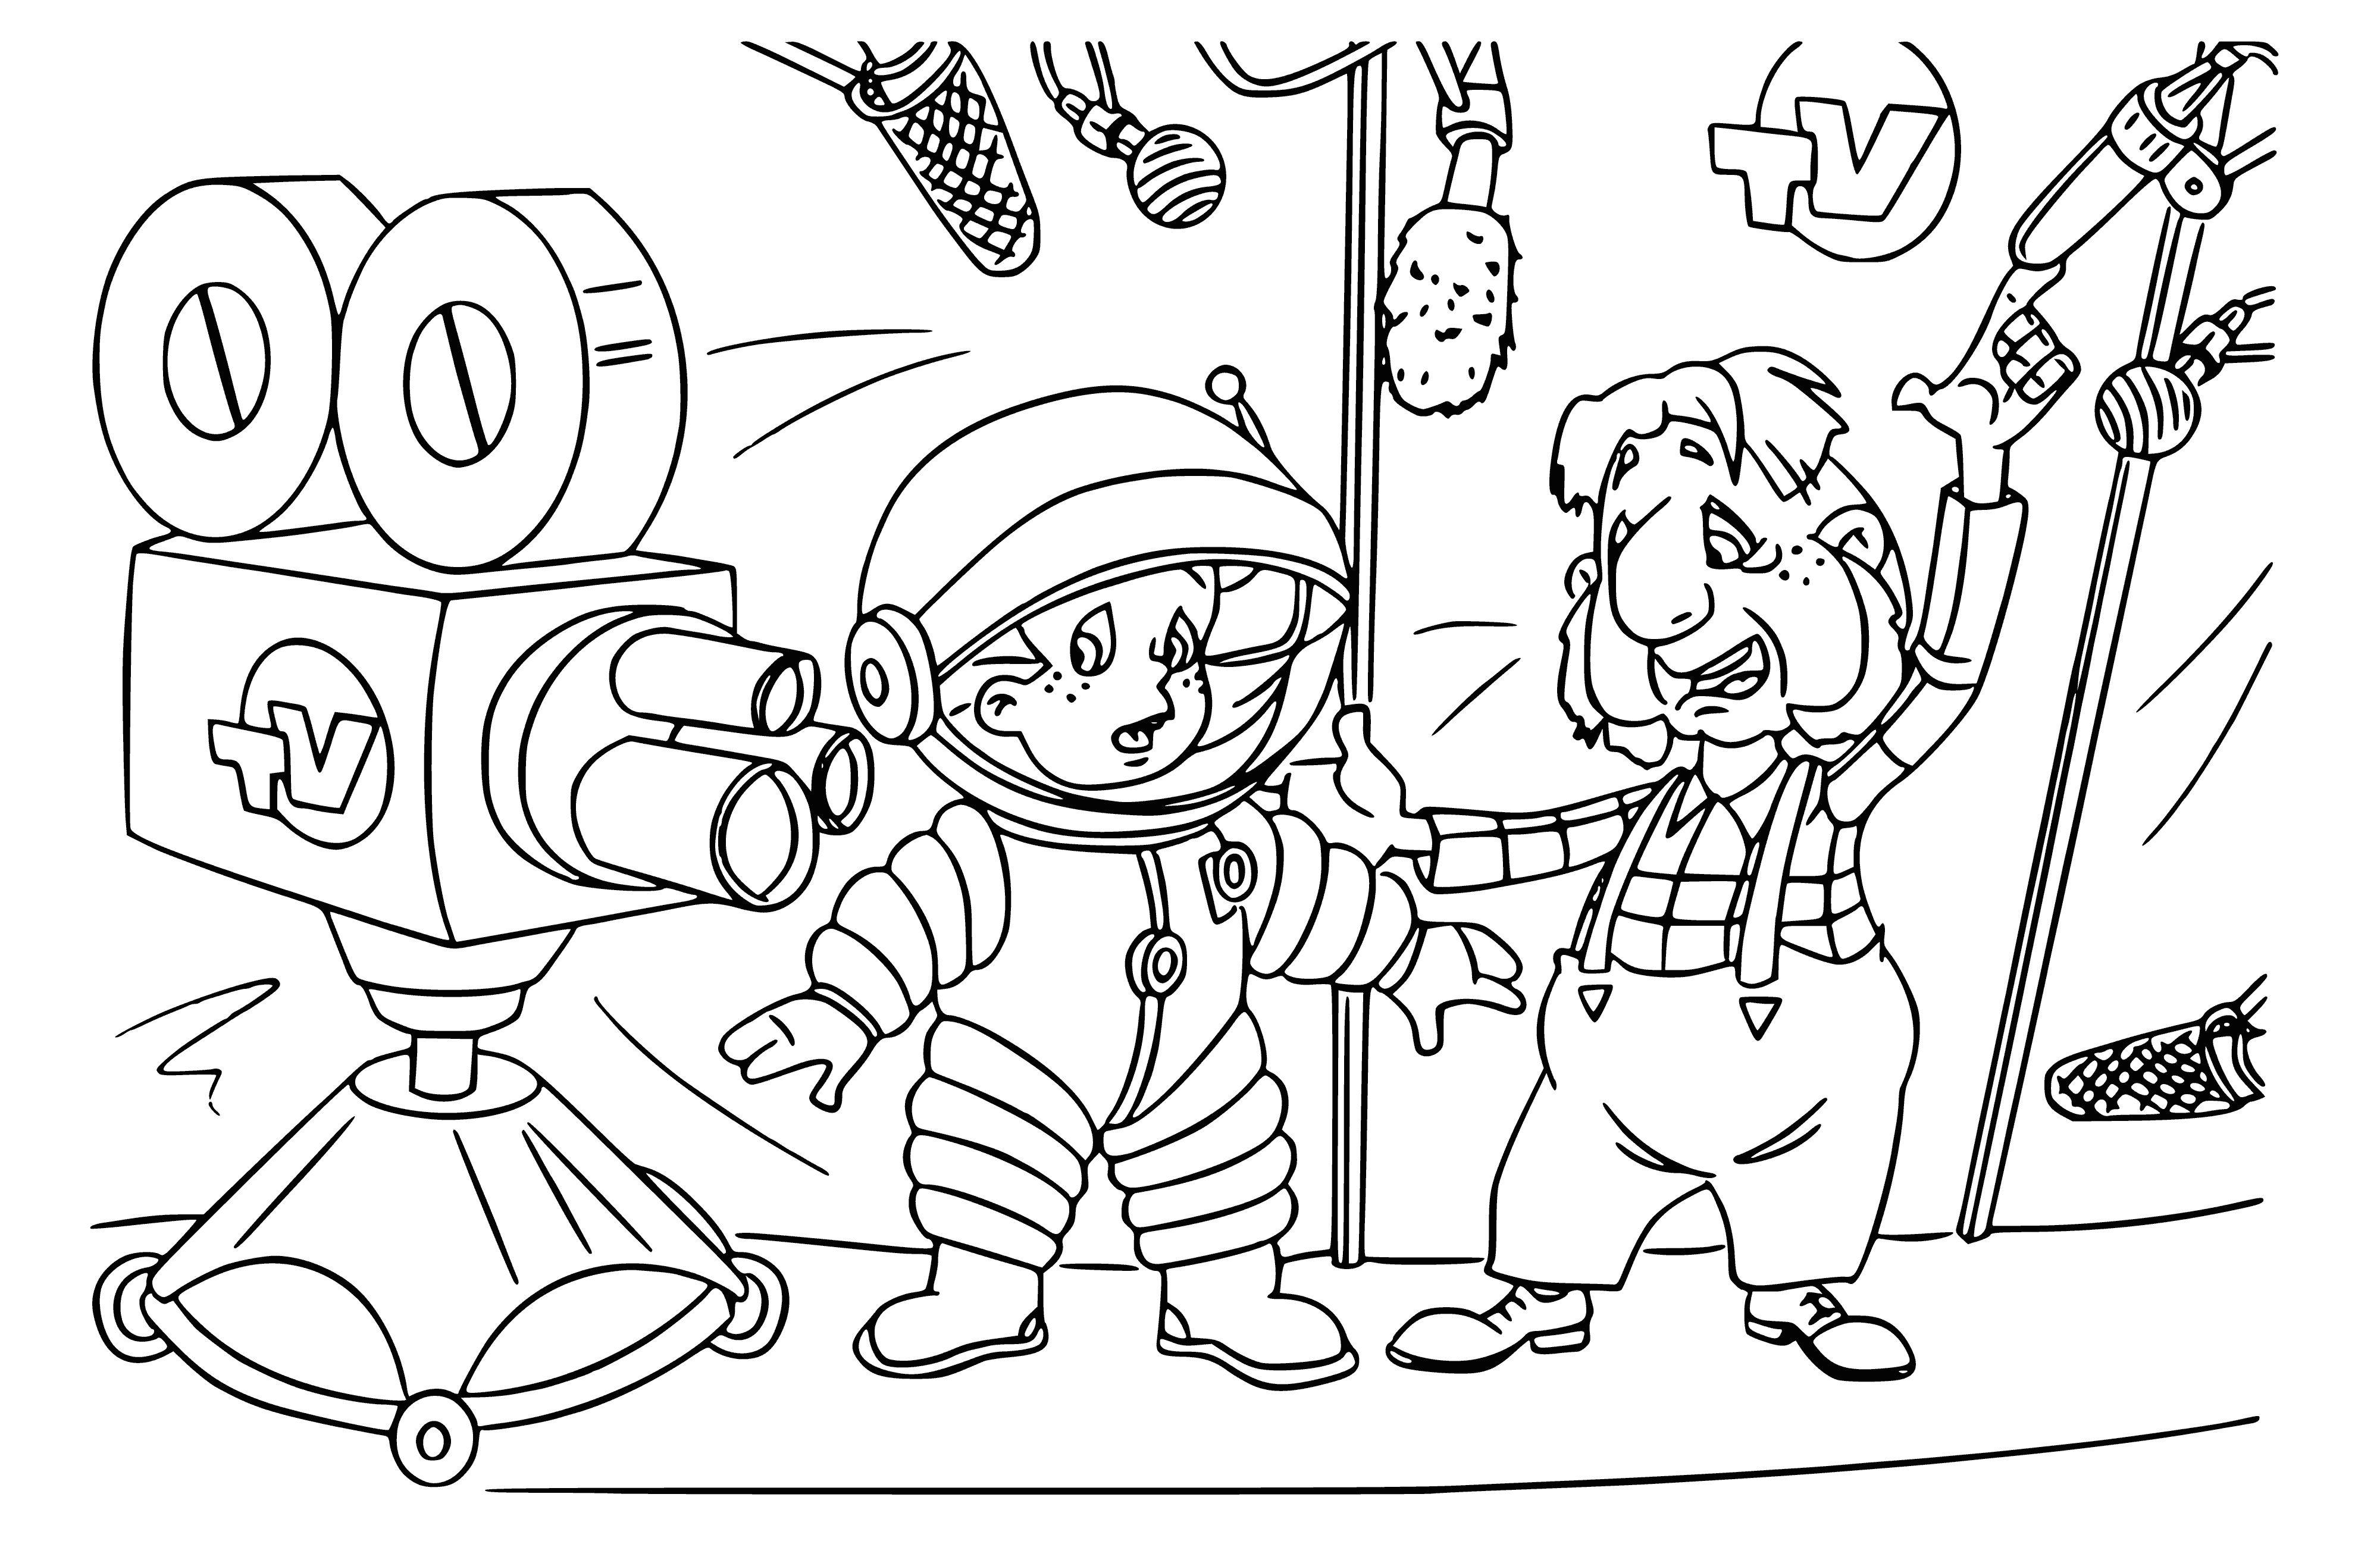 coloring page: Boy in yellow/red on moon with blue backpack & green flag + green spaceship. #exploringtheuniverse #moonman